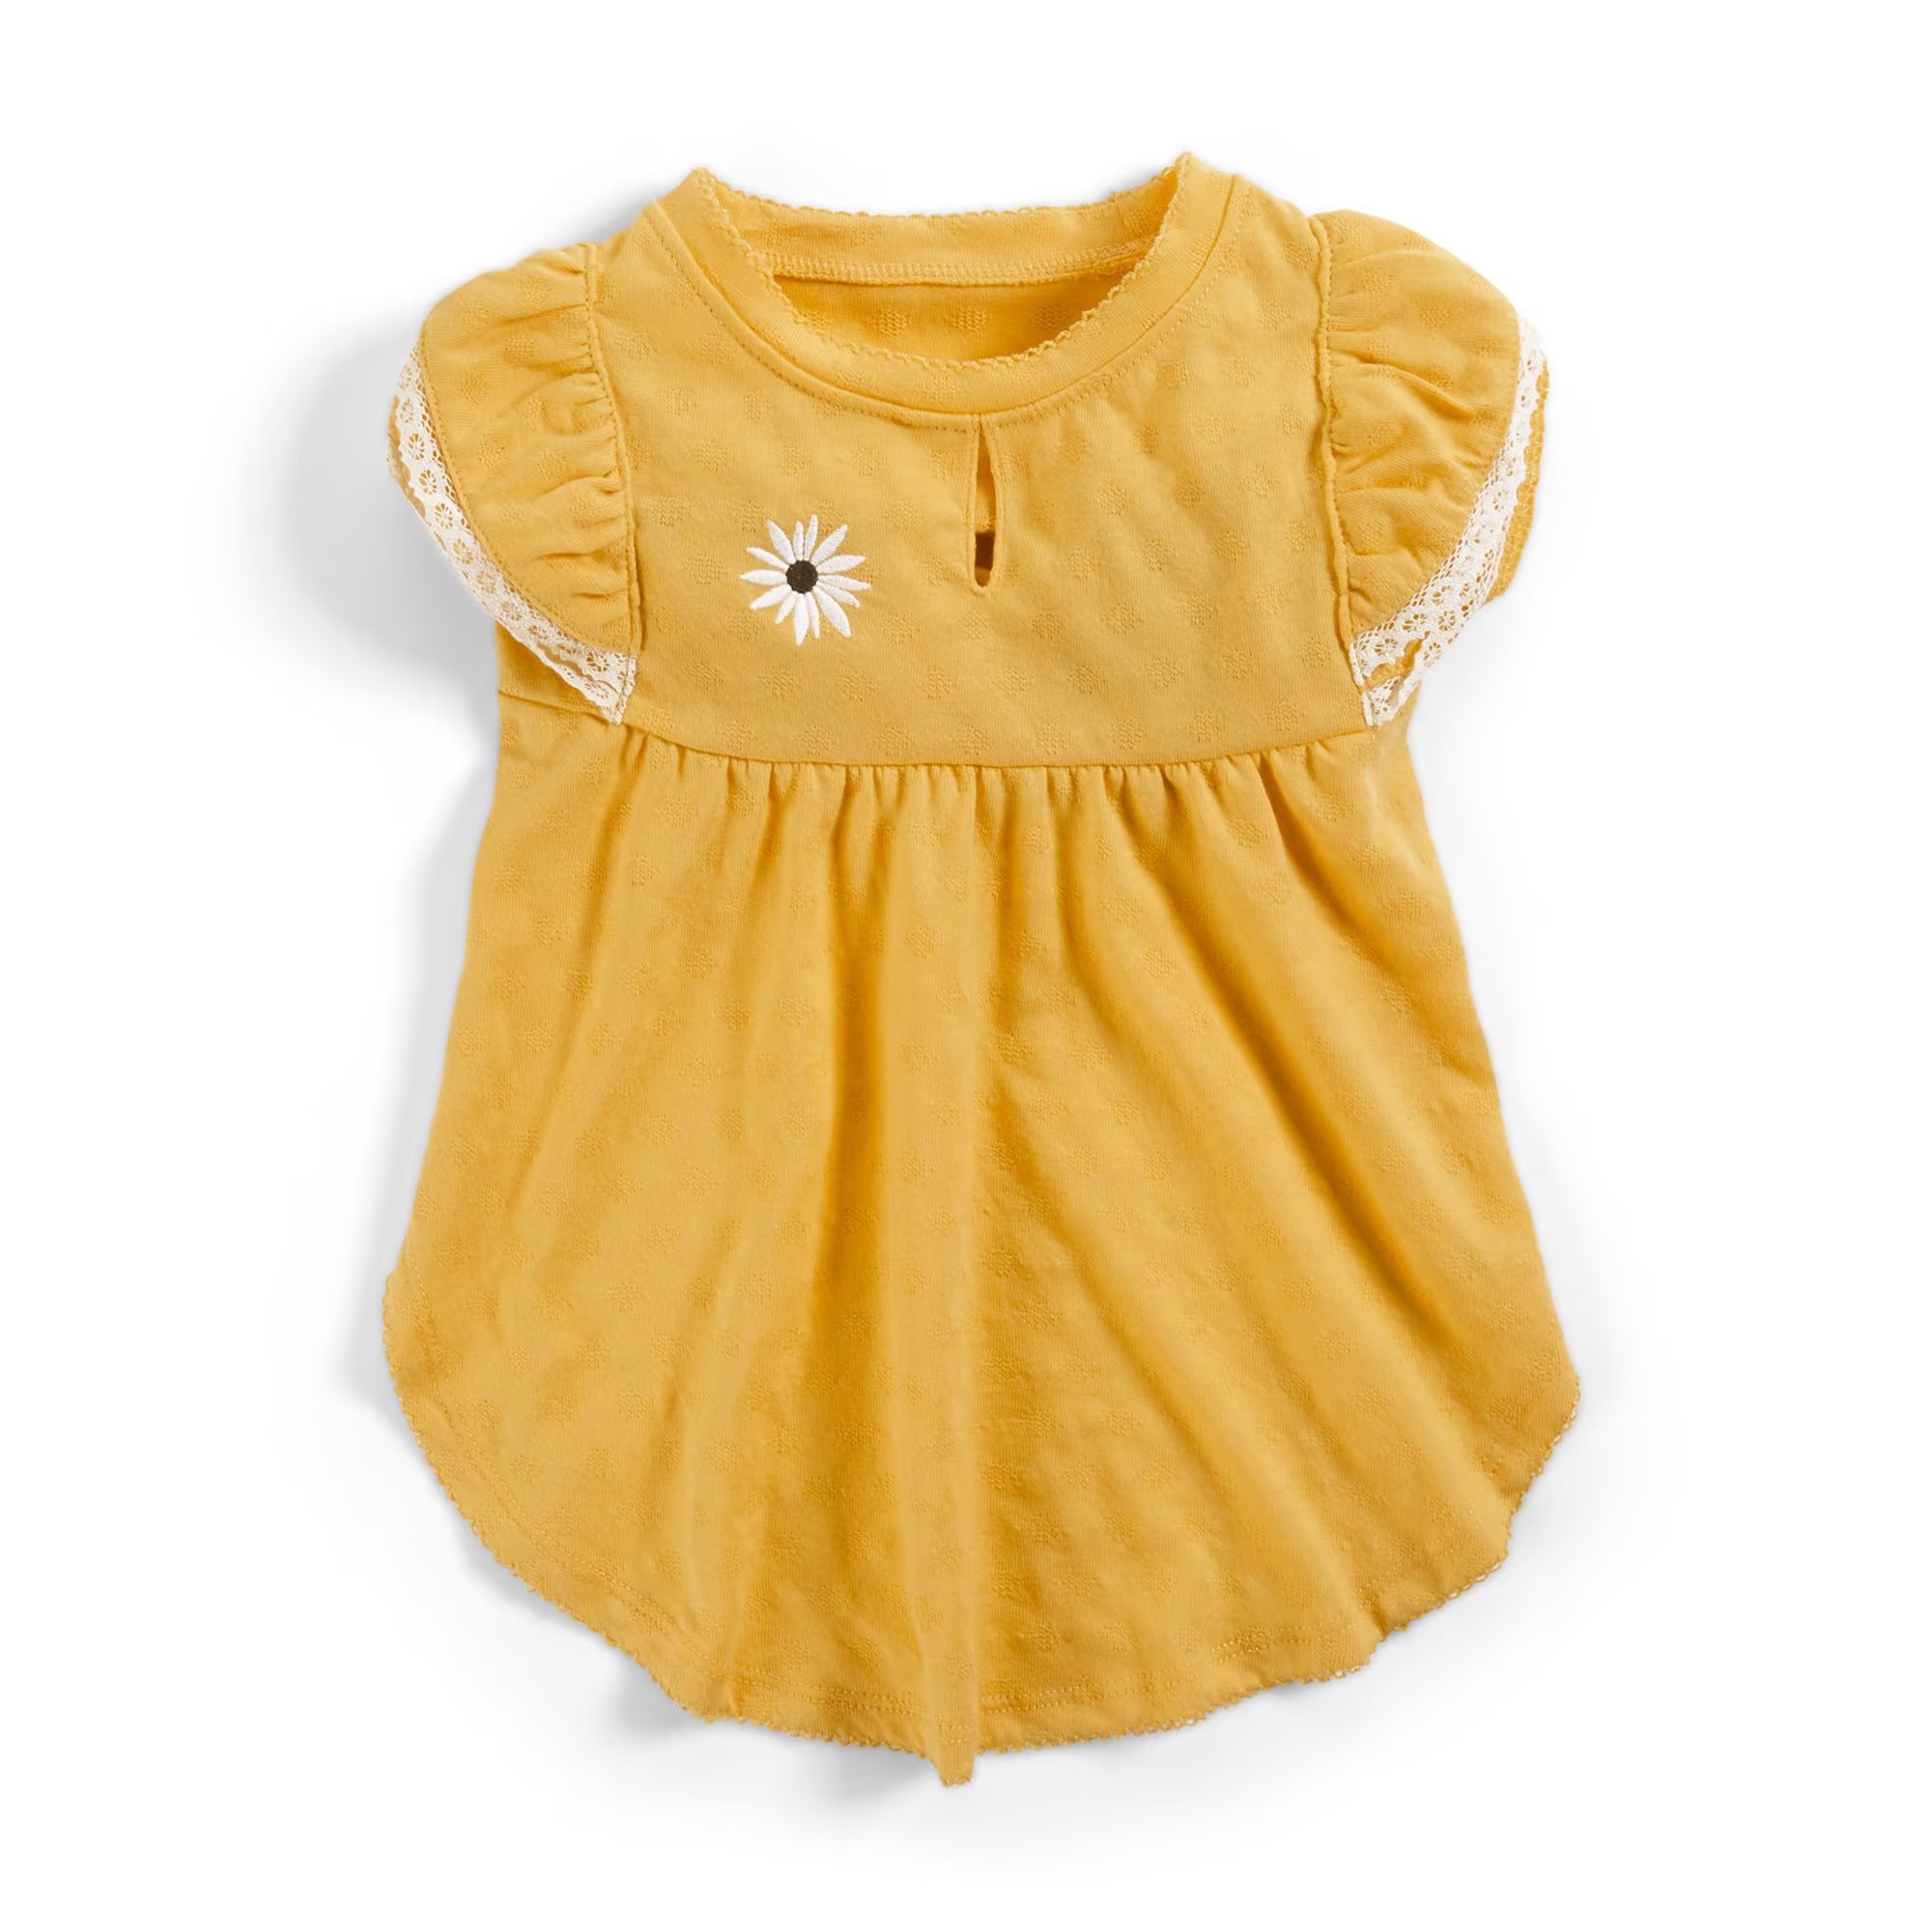 Bond & Co. Started As A Bottle Recycled & Reinvented Ray Of Sunshine Dog Dress, XX-Small | Petco